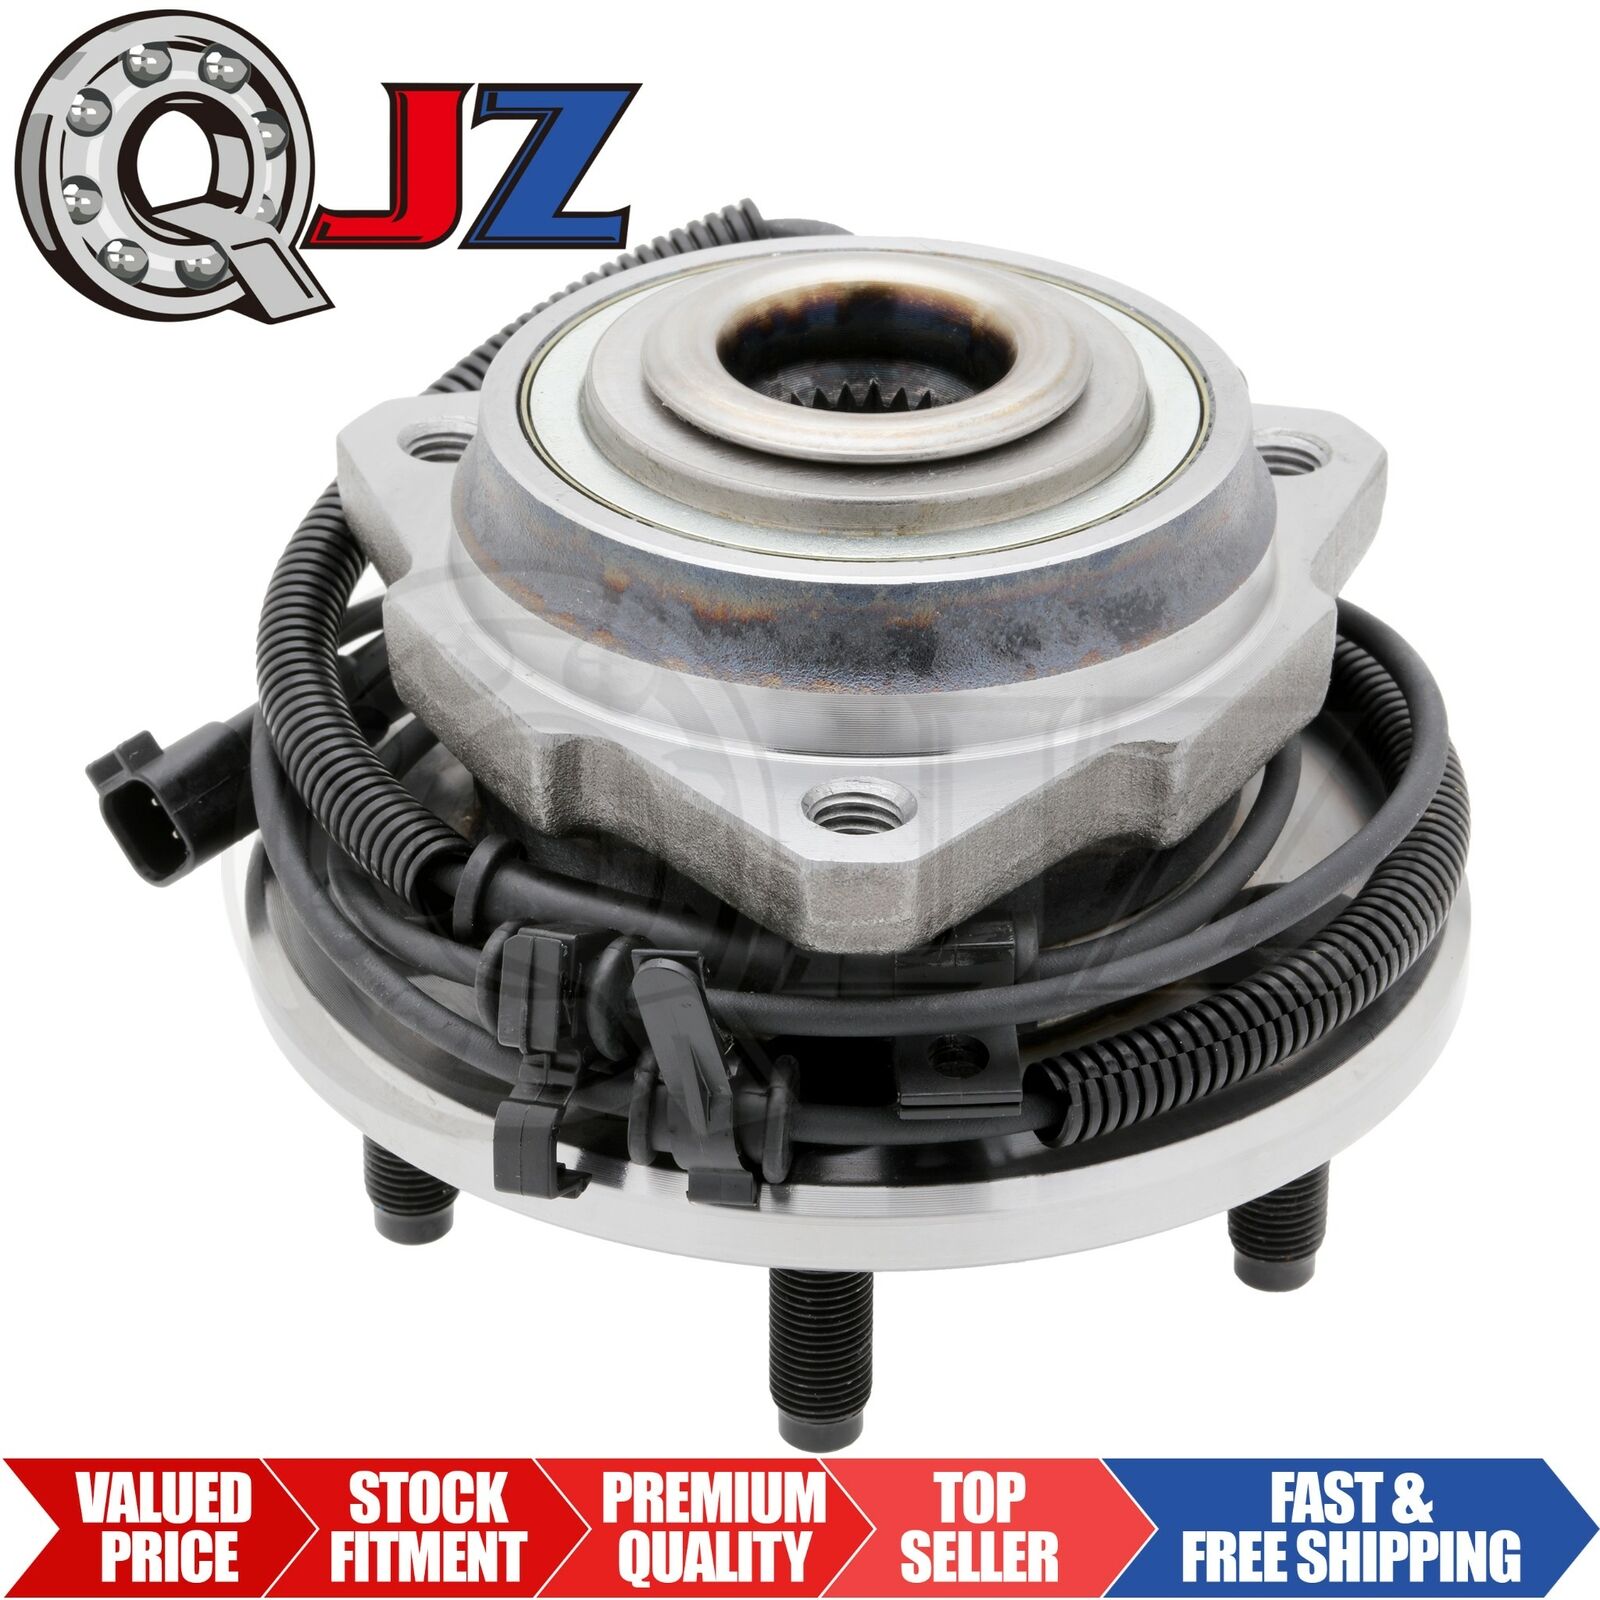 [FRONT-LEFT(Qty.1)] Wheel Hub Assembly For 2002-2007 Jeep Liberty RWD/4WD-Model